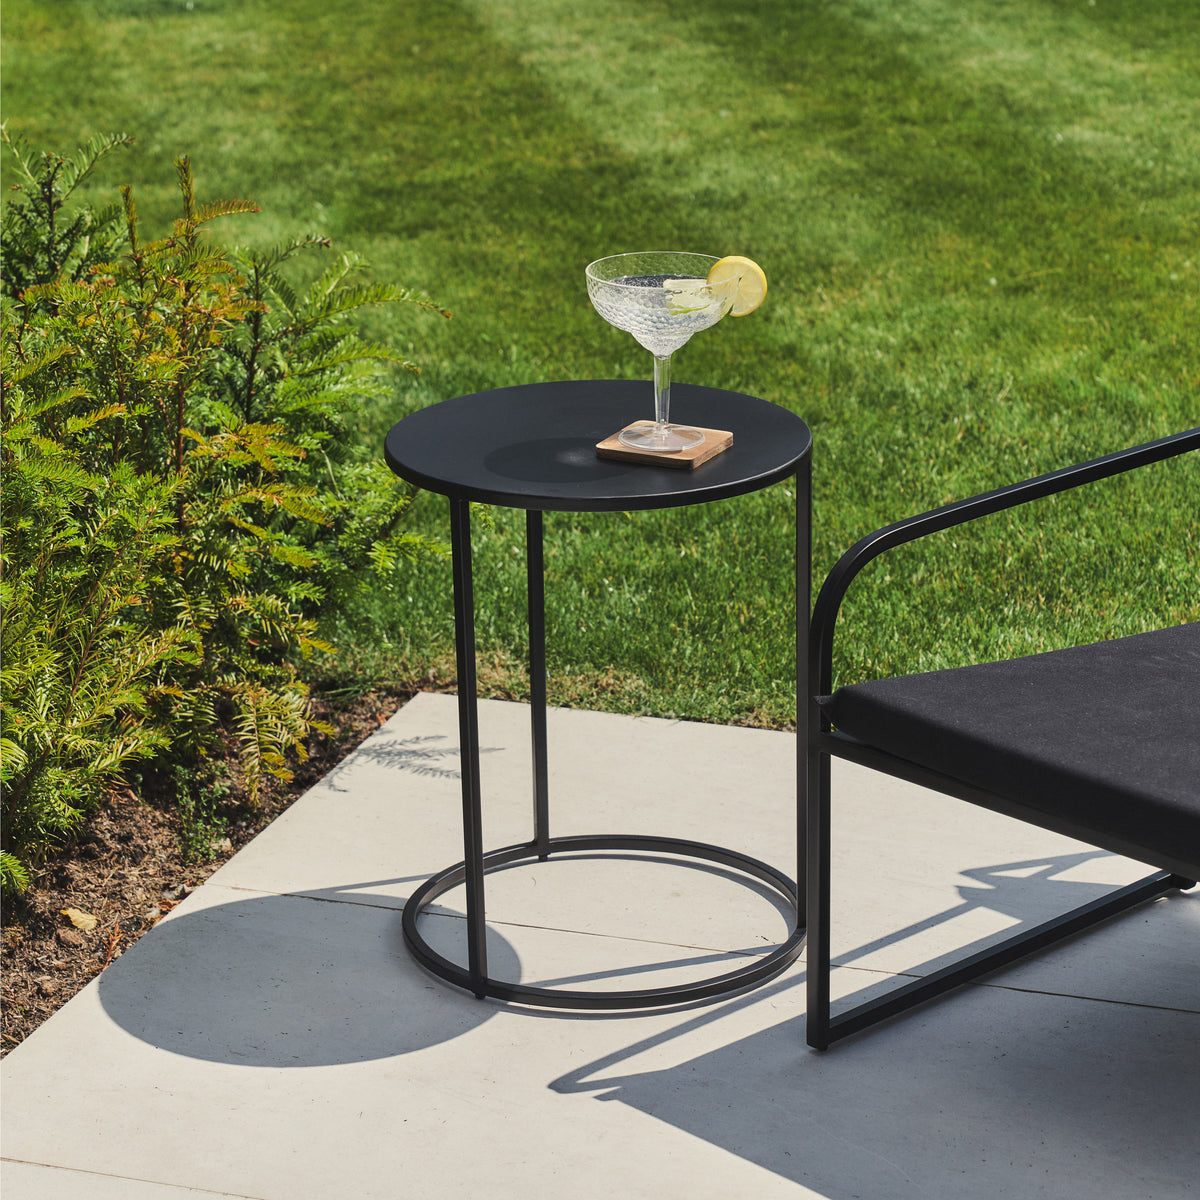 Tuscany - Black Modern Rounded Garden Side Table